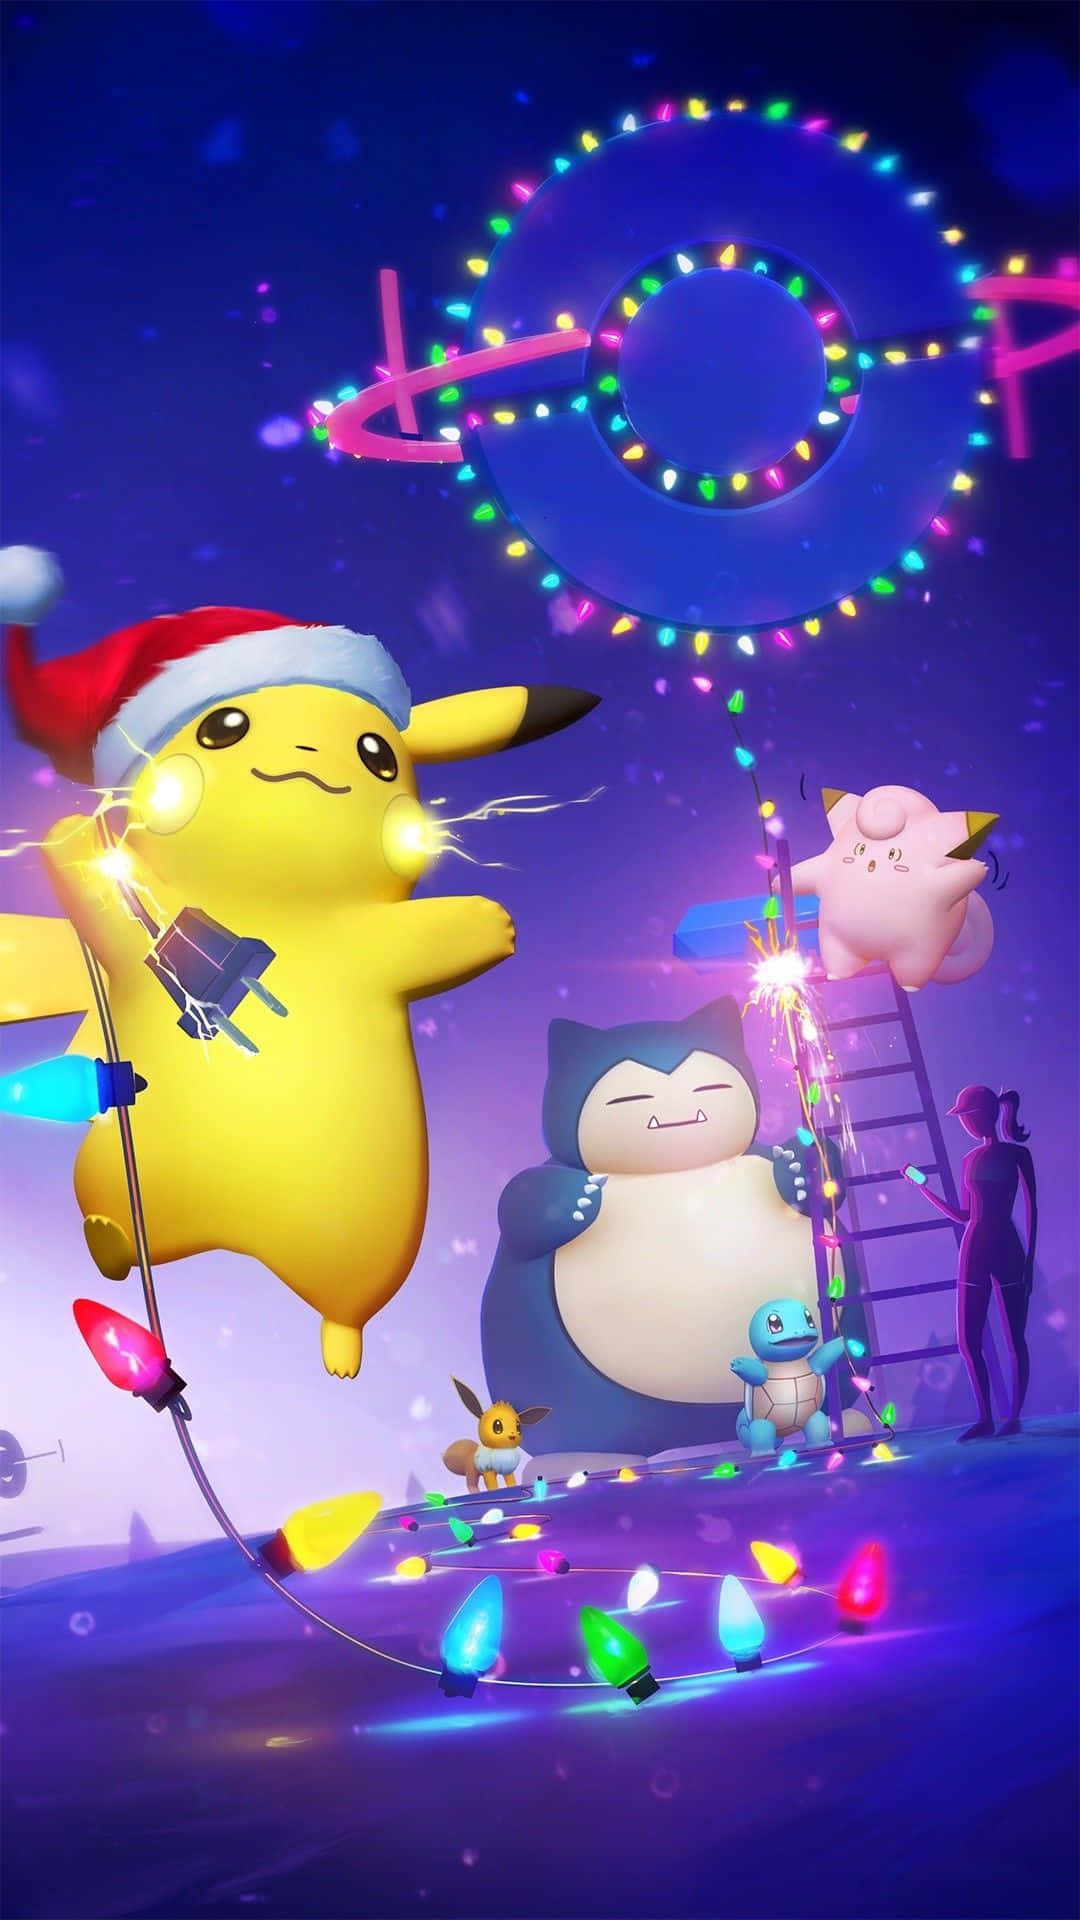 Pokemon Christmas - Ps4 - Ps4 - Ps4 - Ps4 - Ps Background